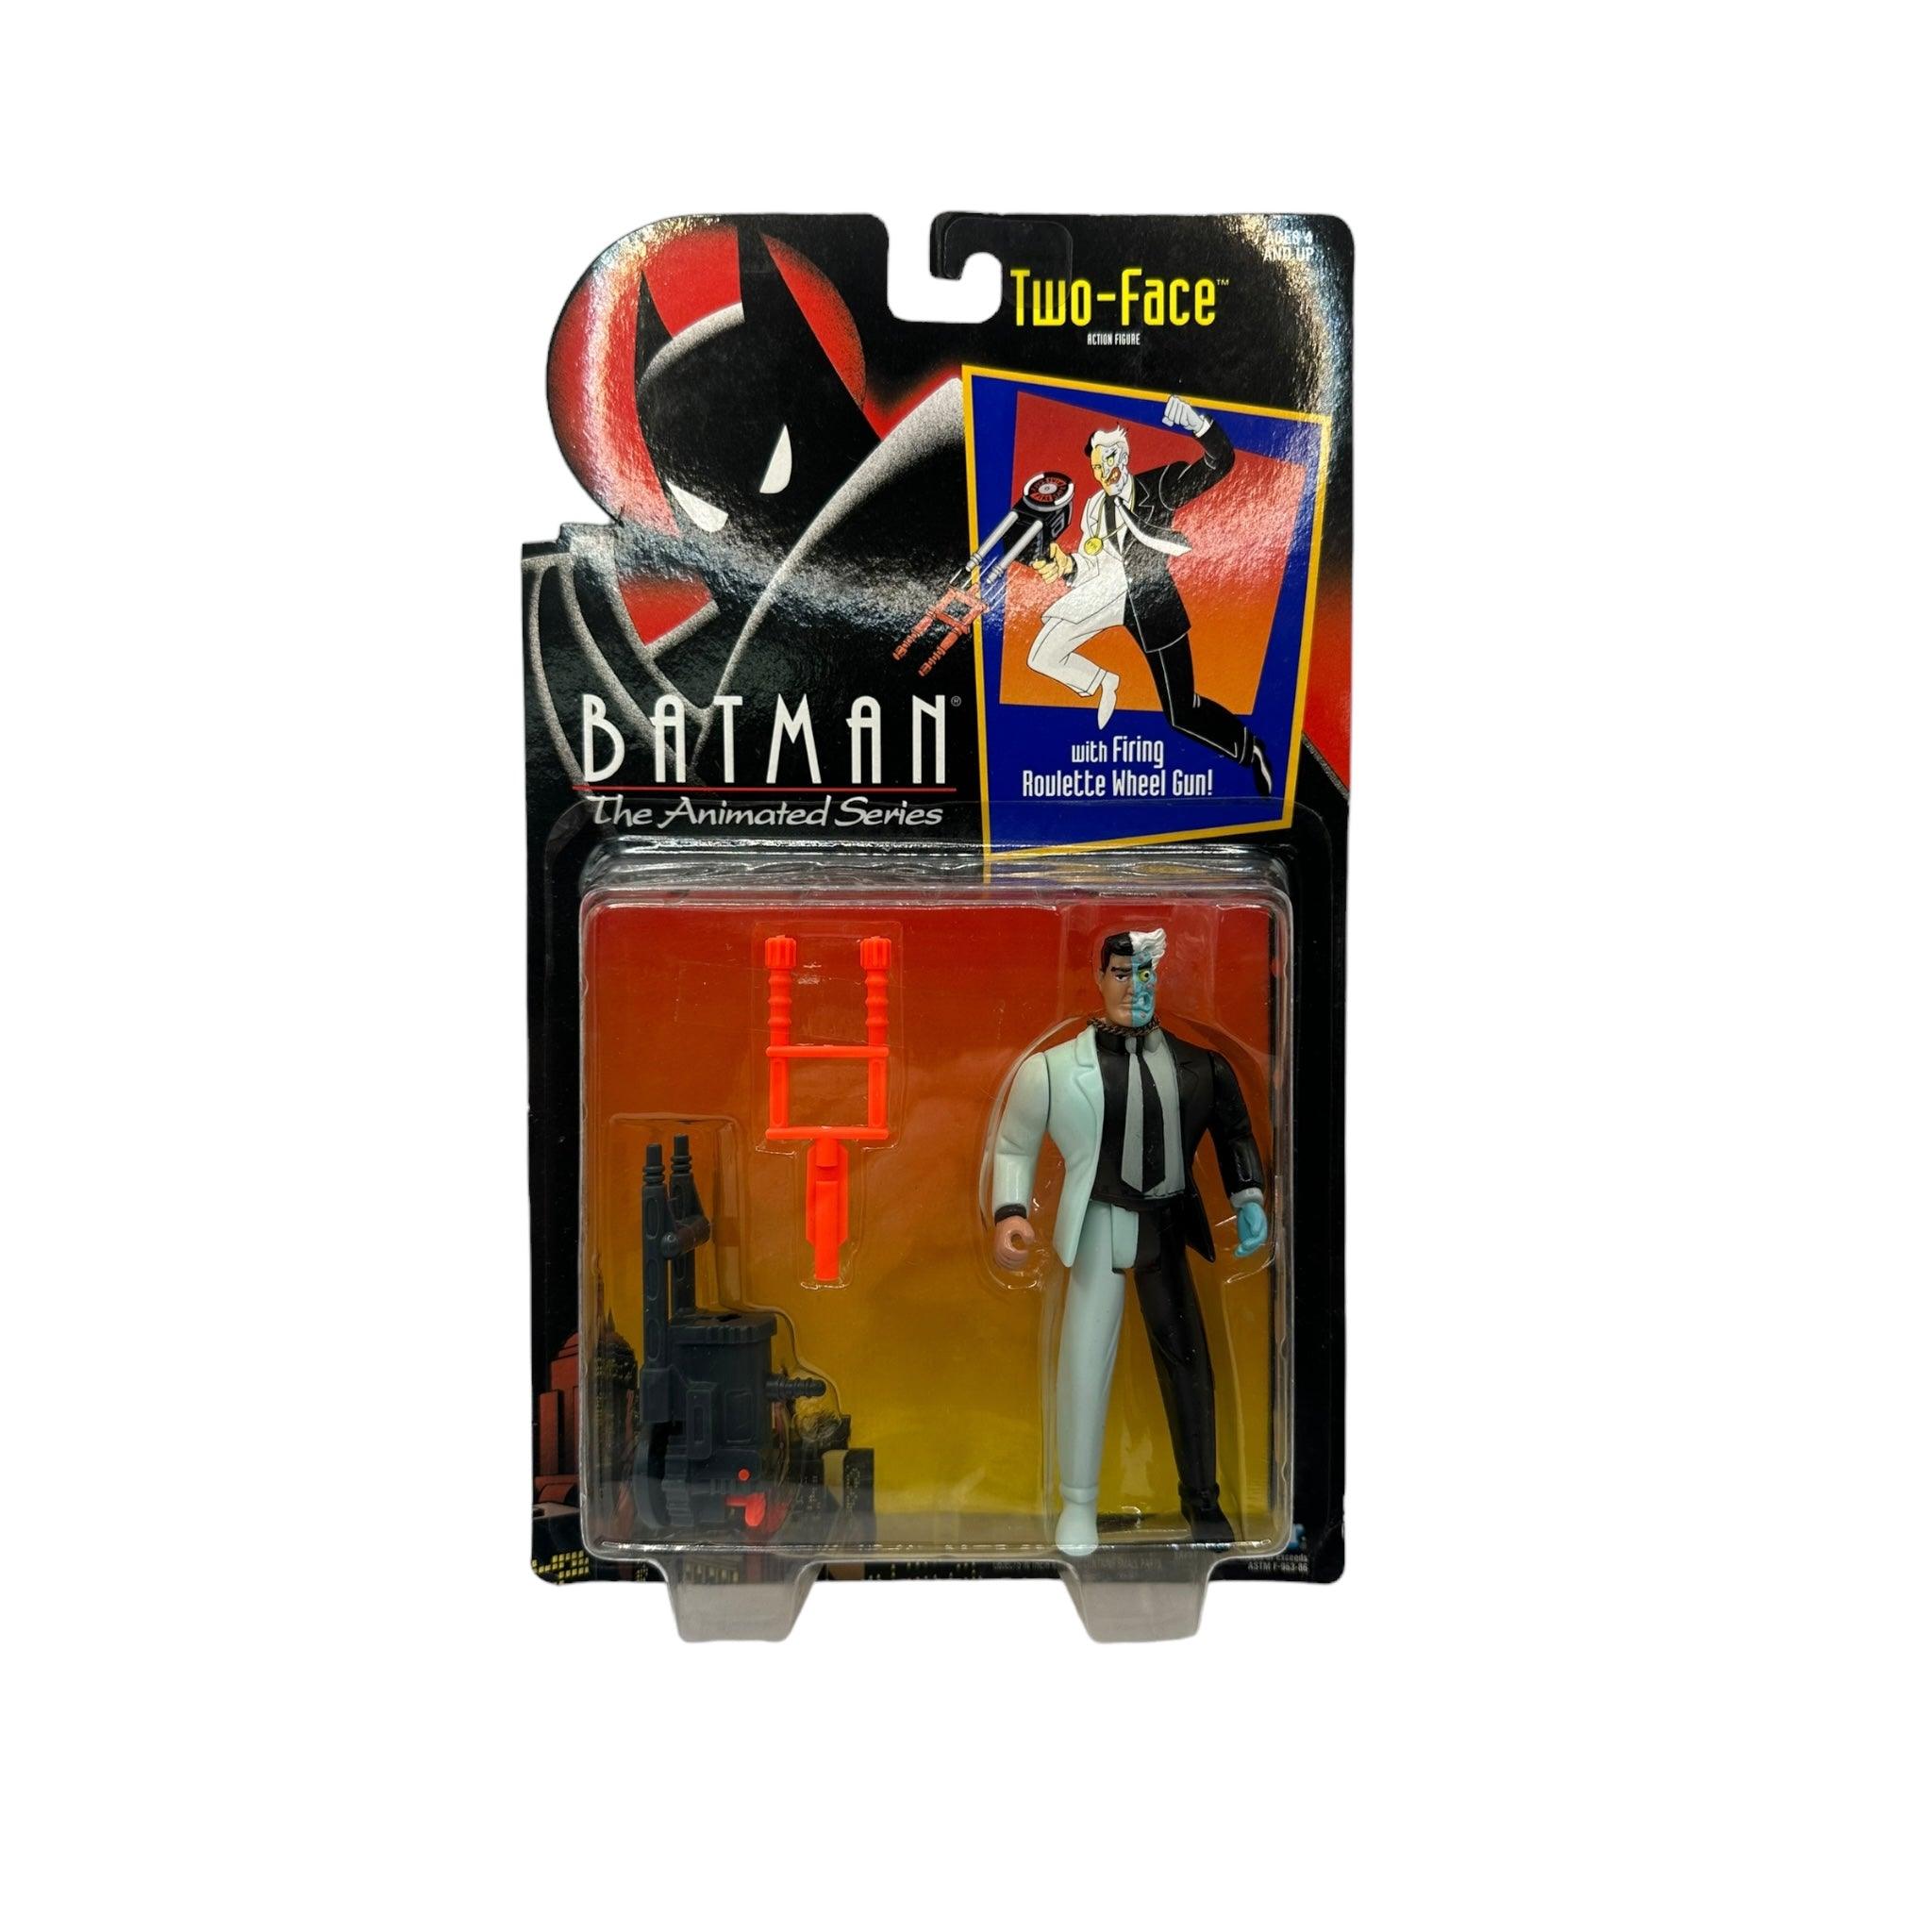 1992 KENNER BATMAN ANIMATED SERIES 1 TWO-FACE AF